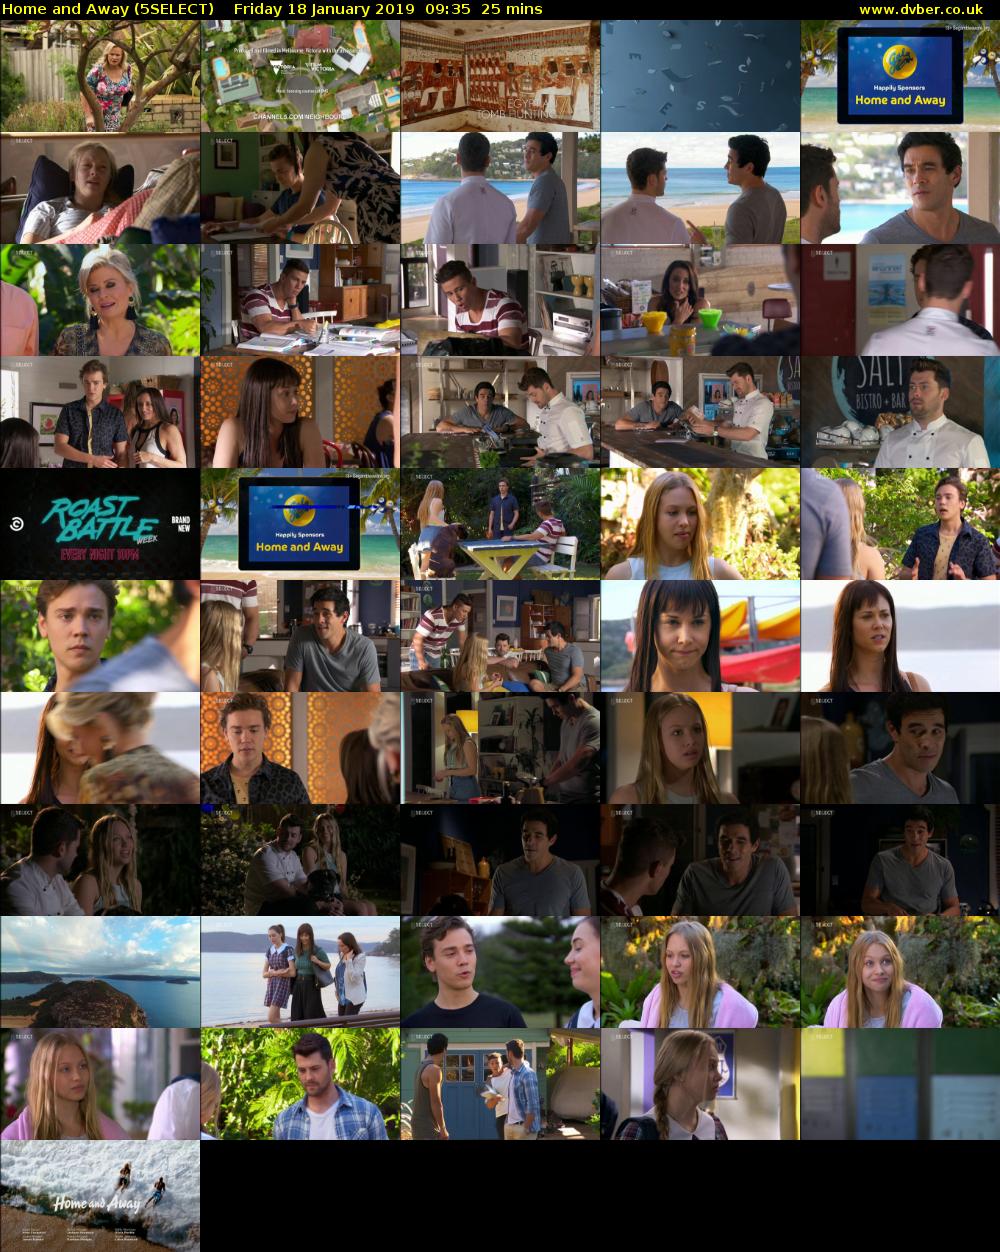 Home and Away (5SELECT) Friday 18 January 2019 09:35 - 10:00